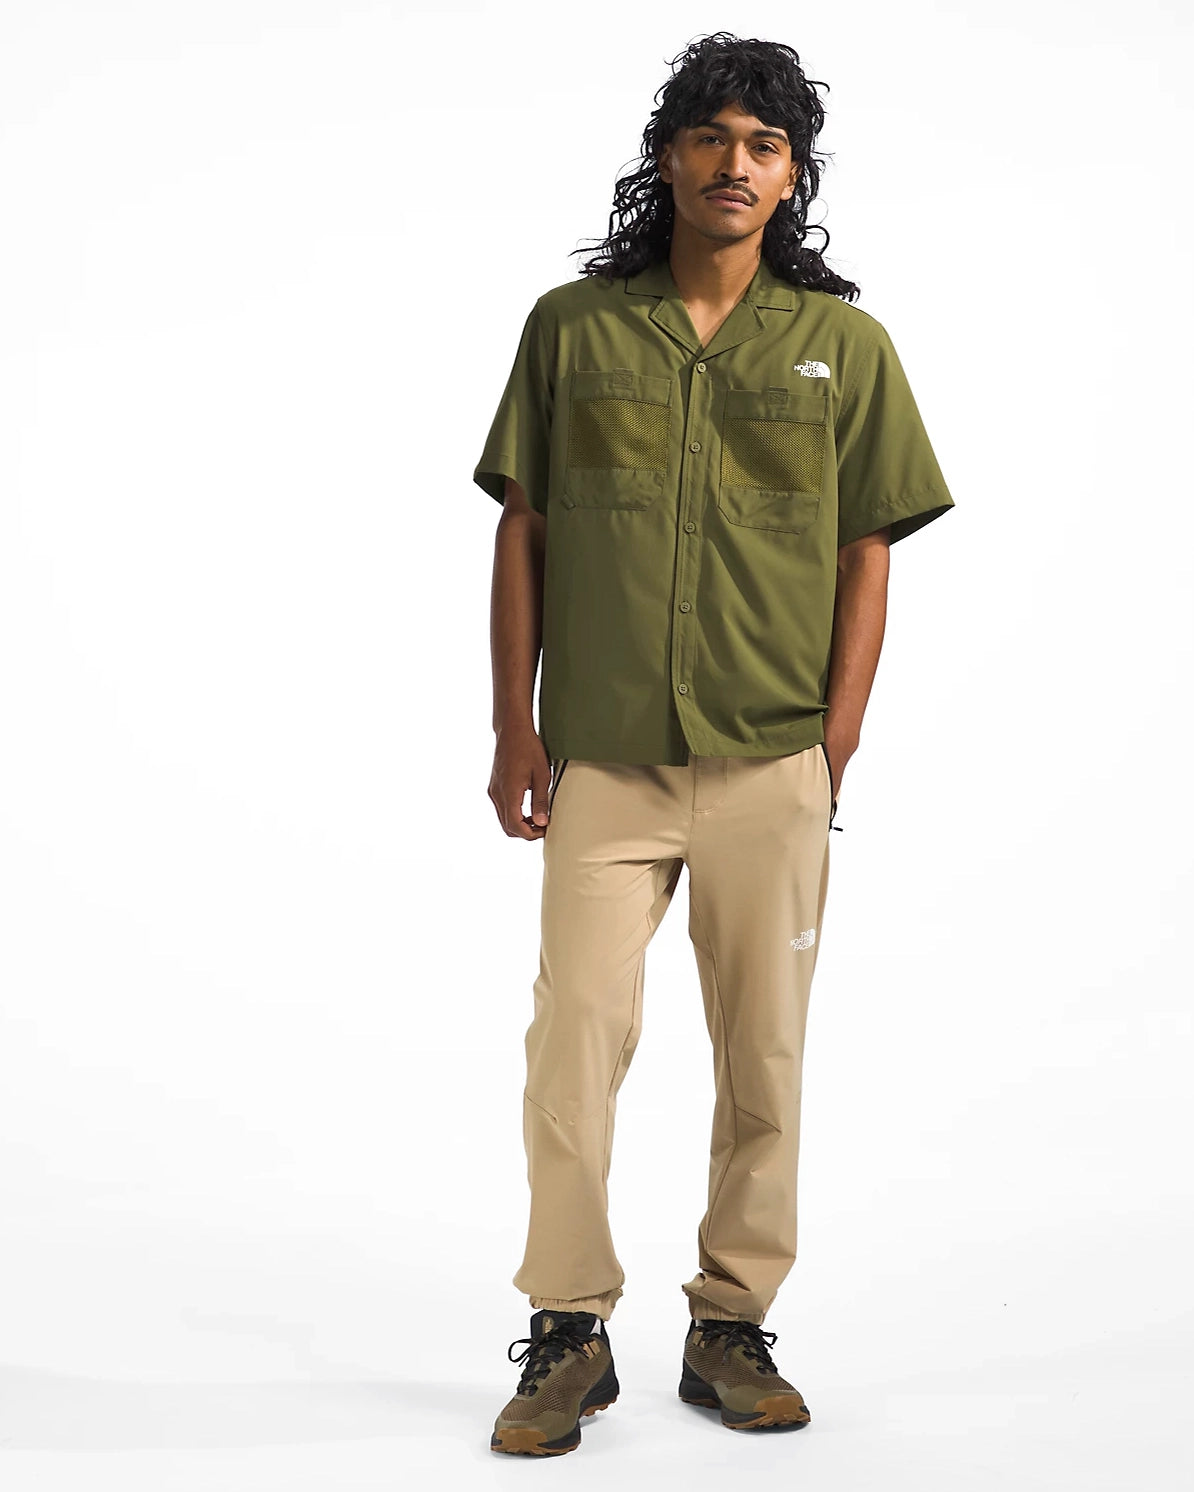 Men’s First Trail Short-Sleeve Shirt - Forest Olive